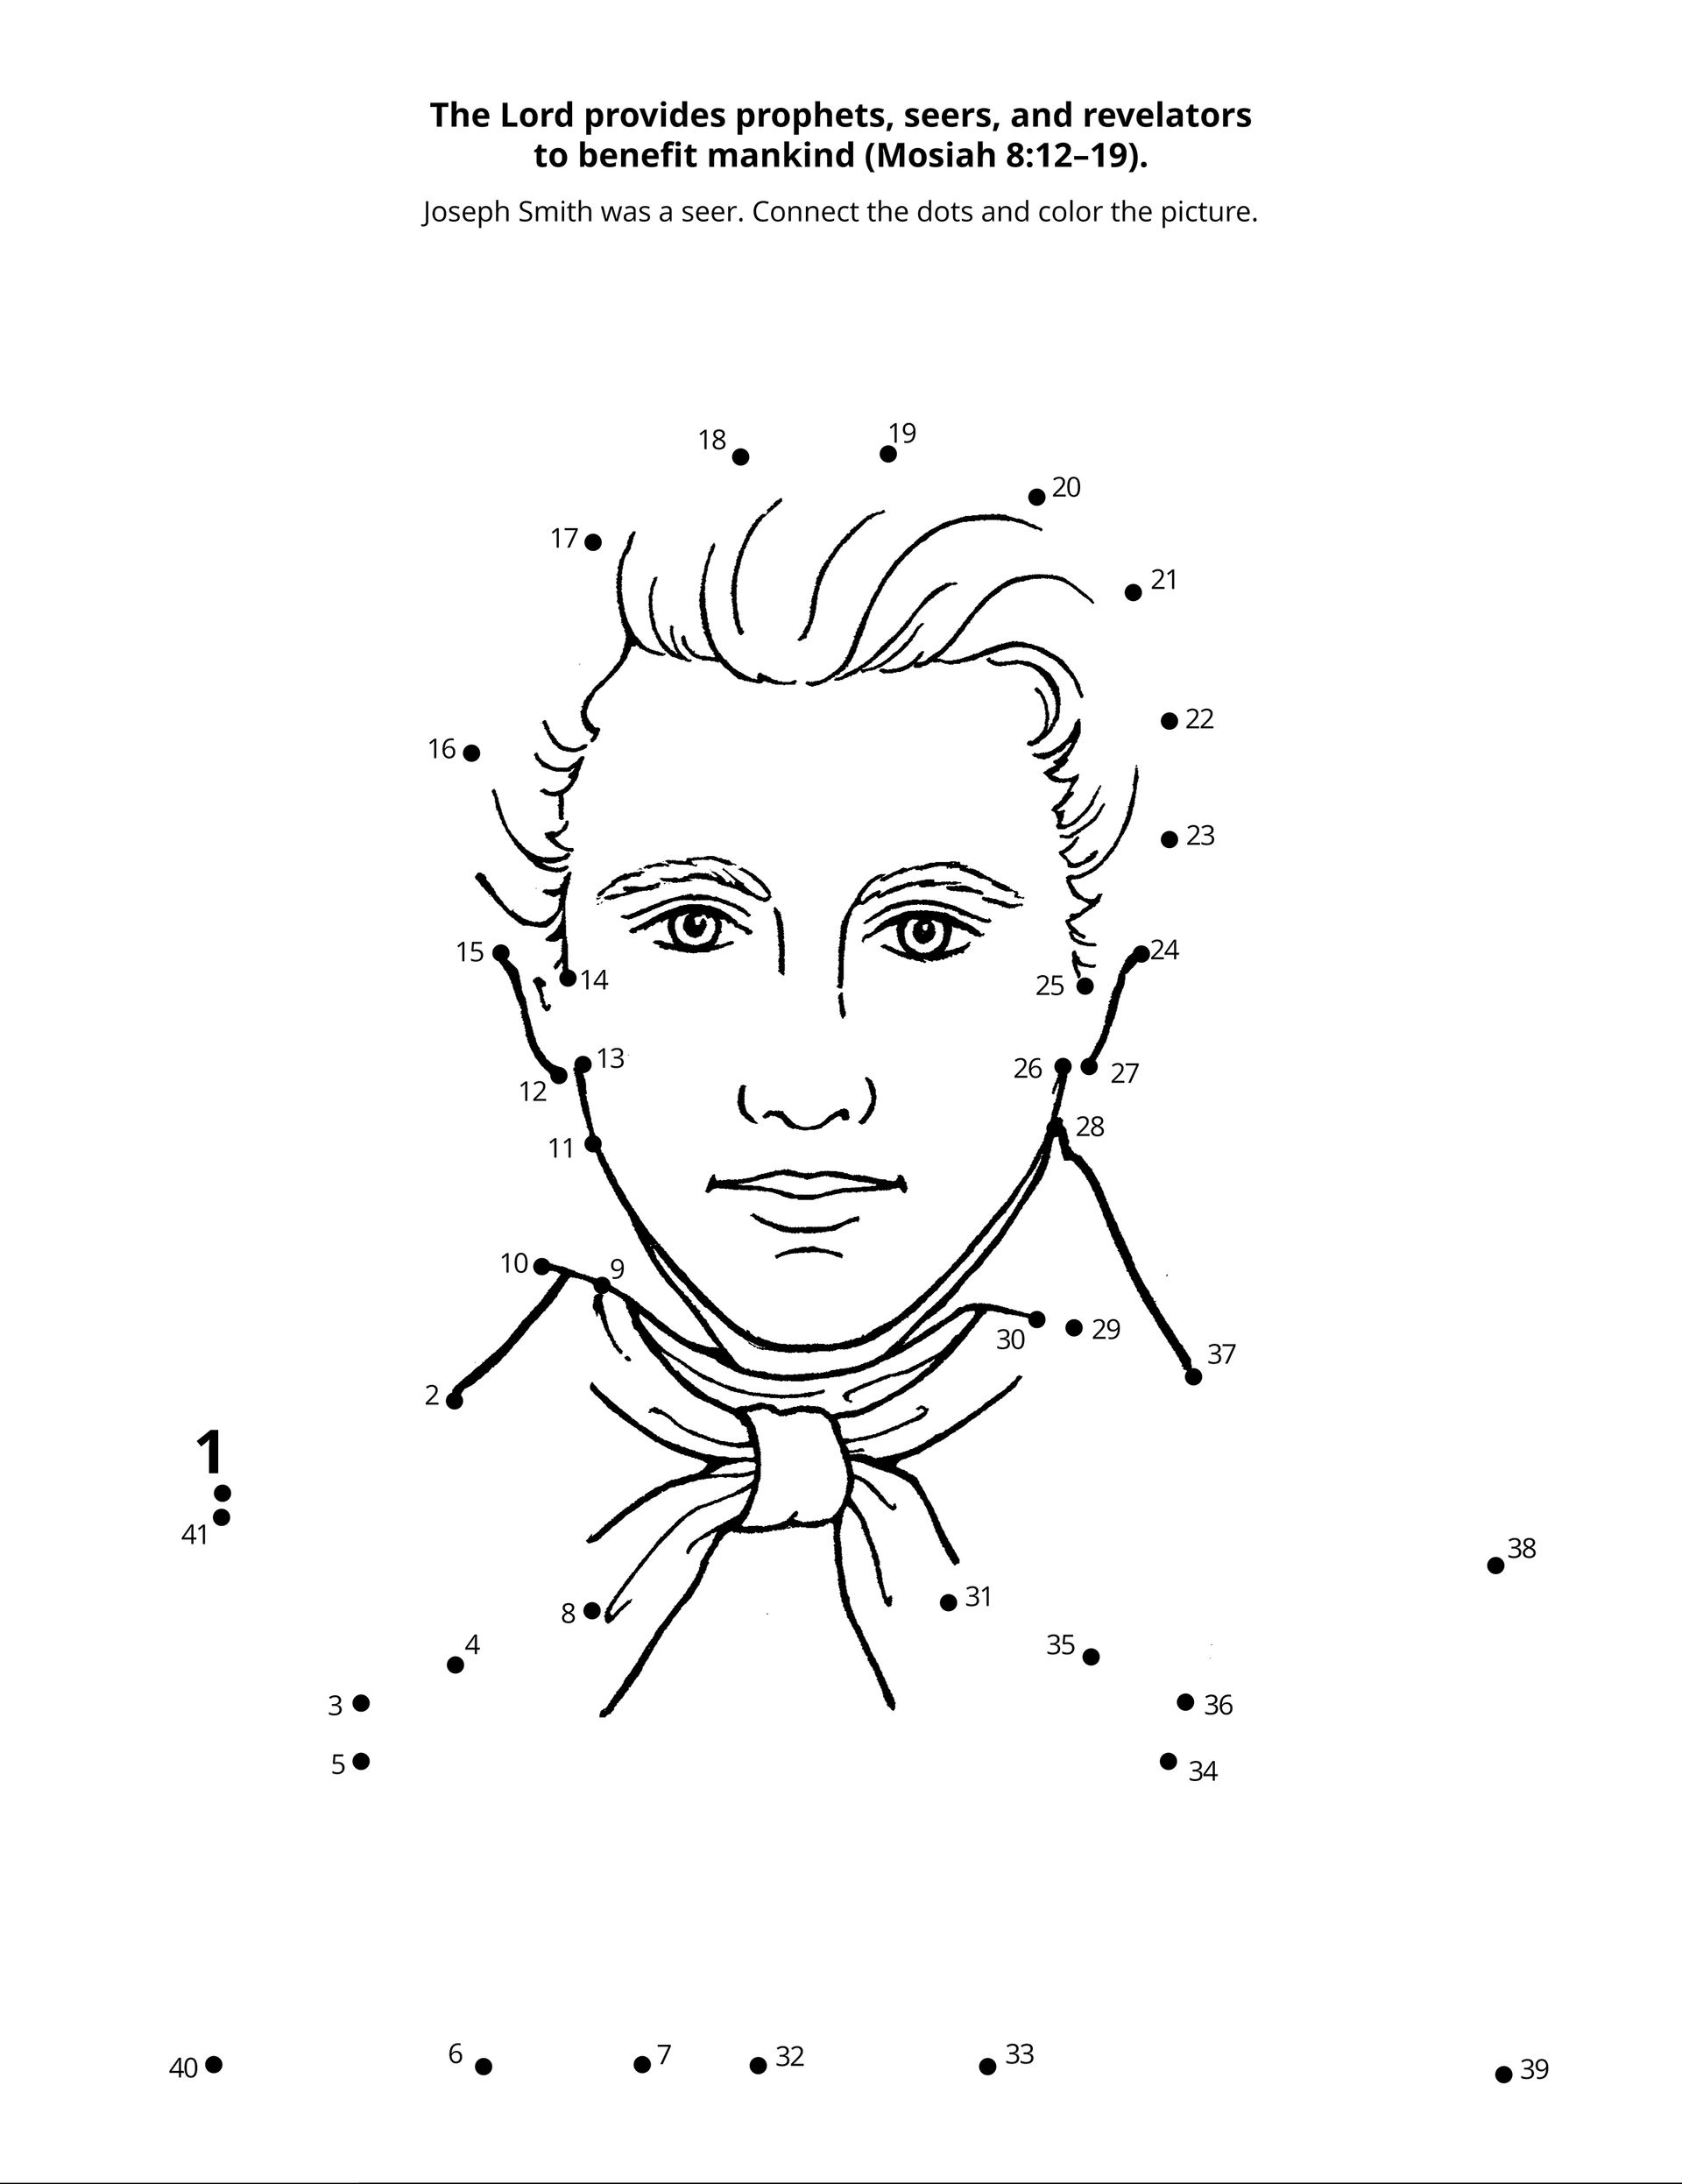 A connect-the-dot activity depicting Joseph Smith.